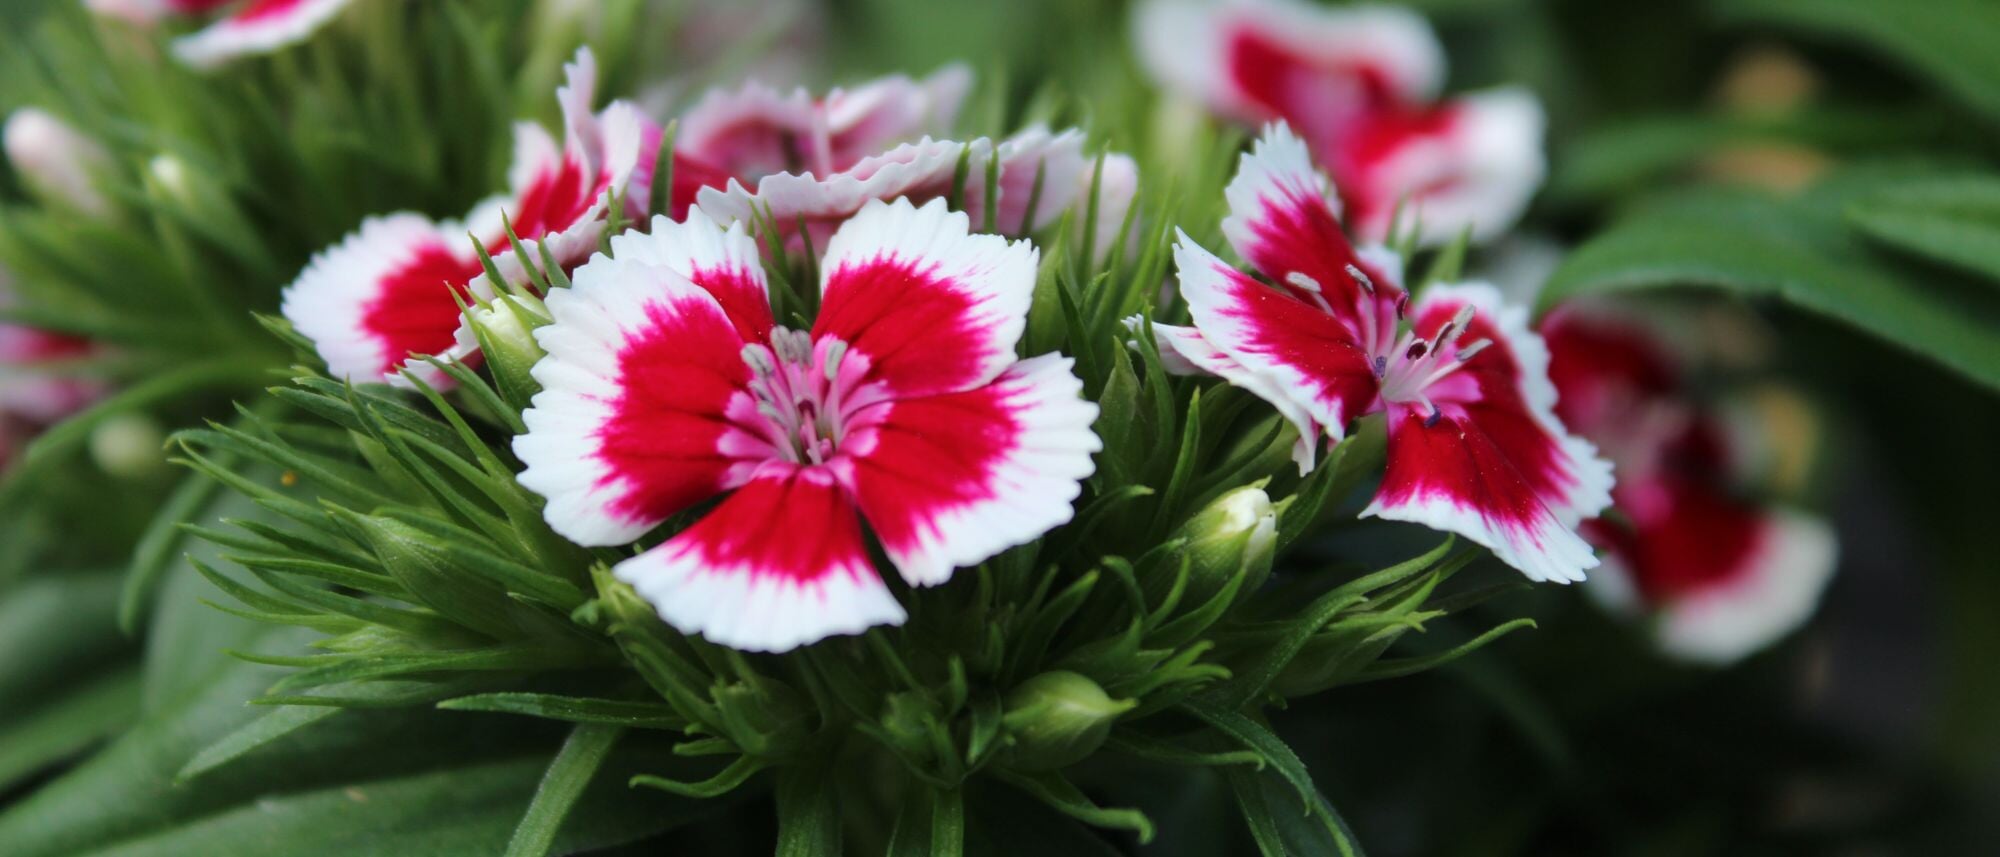 Grow container friendly pink dianthus in your flower garden